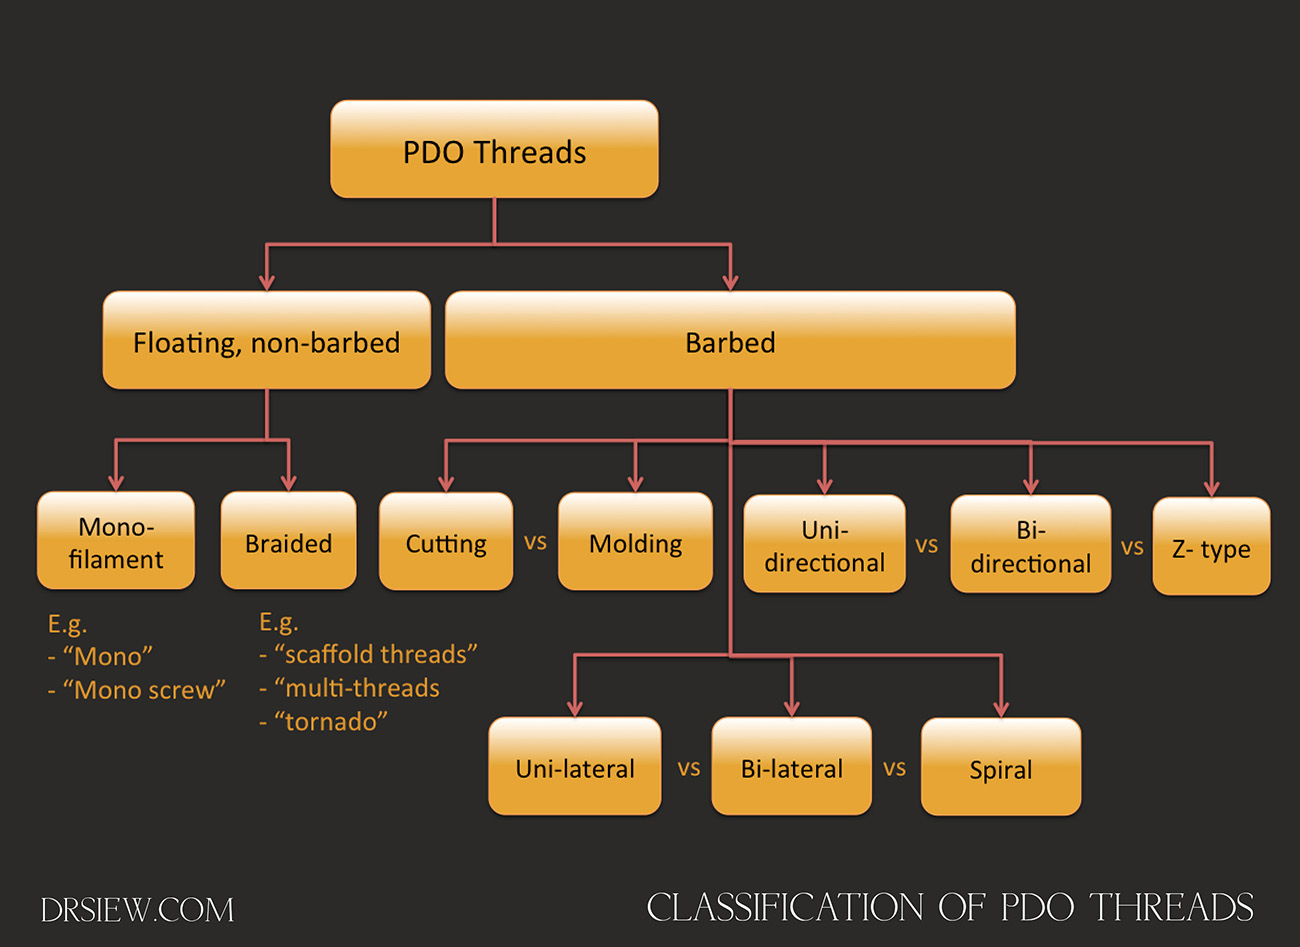 PDO Threads classification Dr Siew